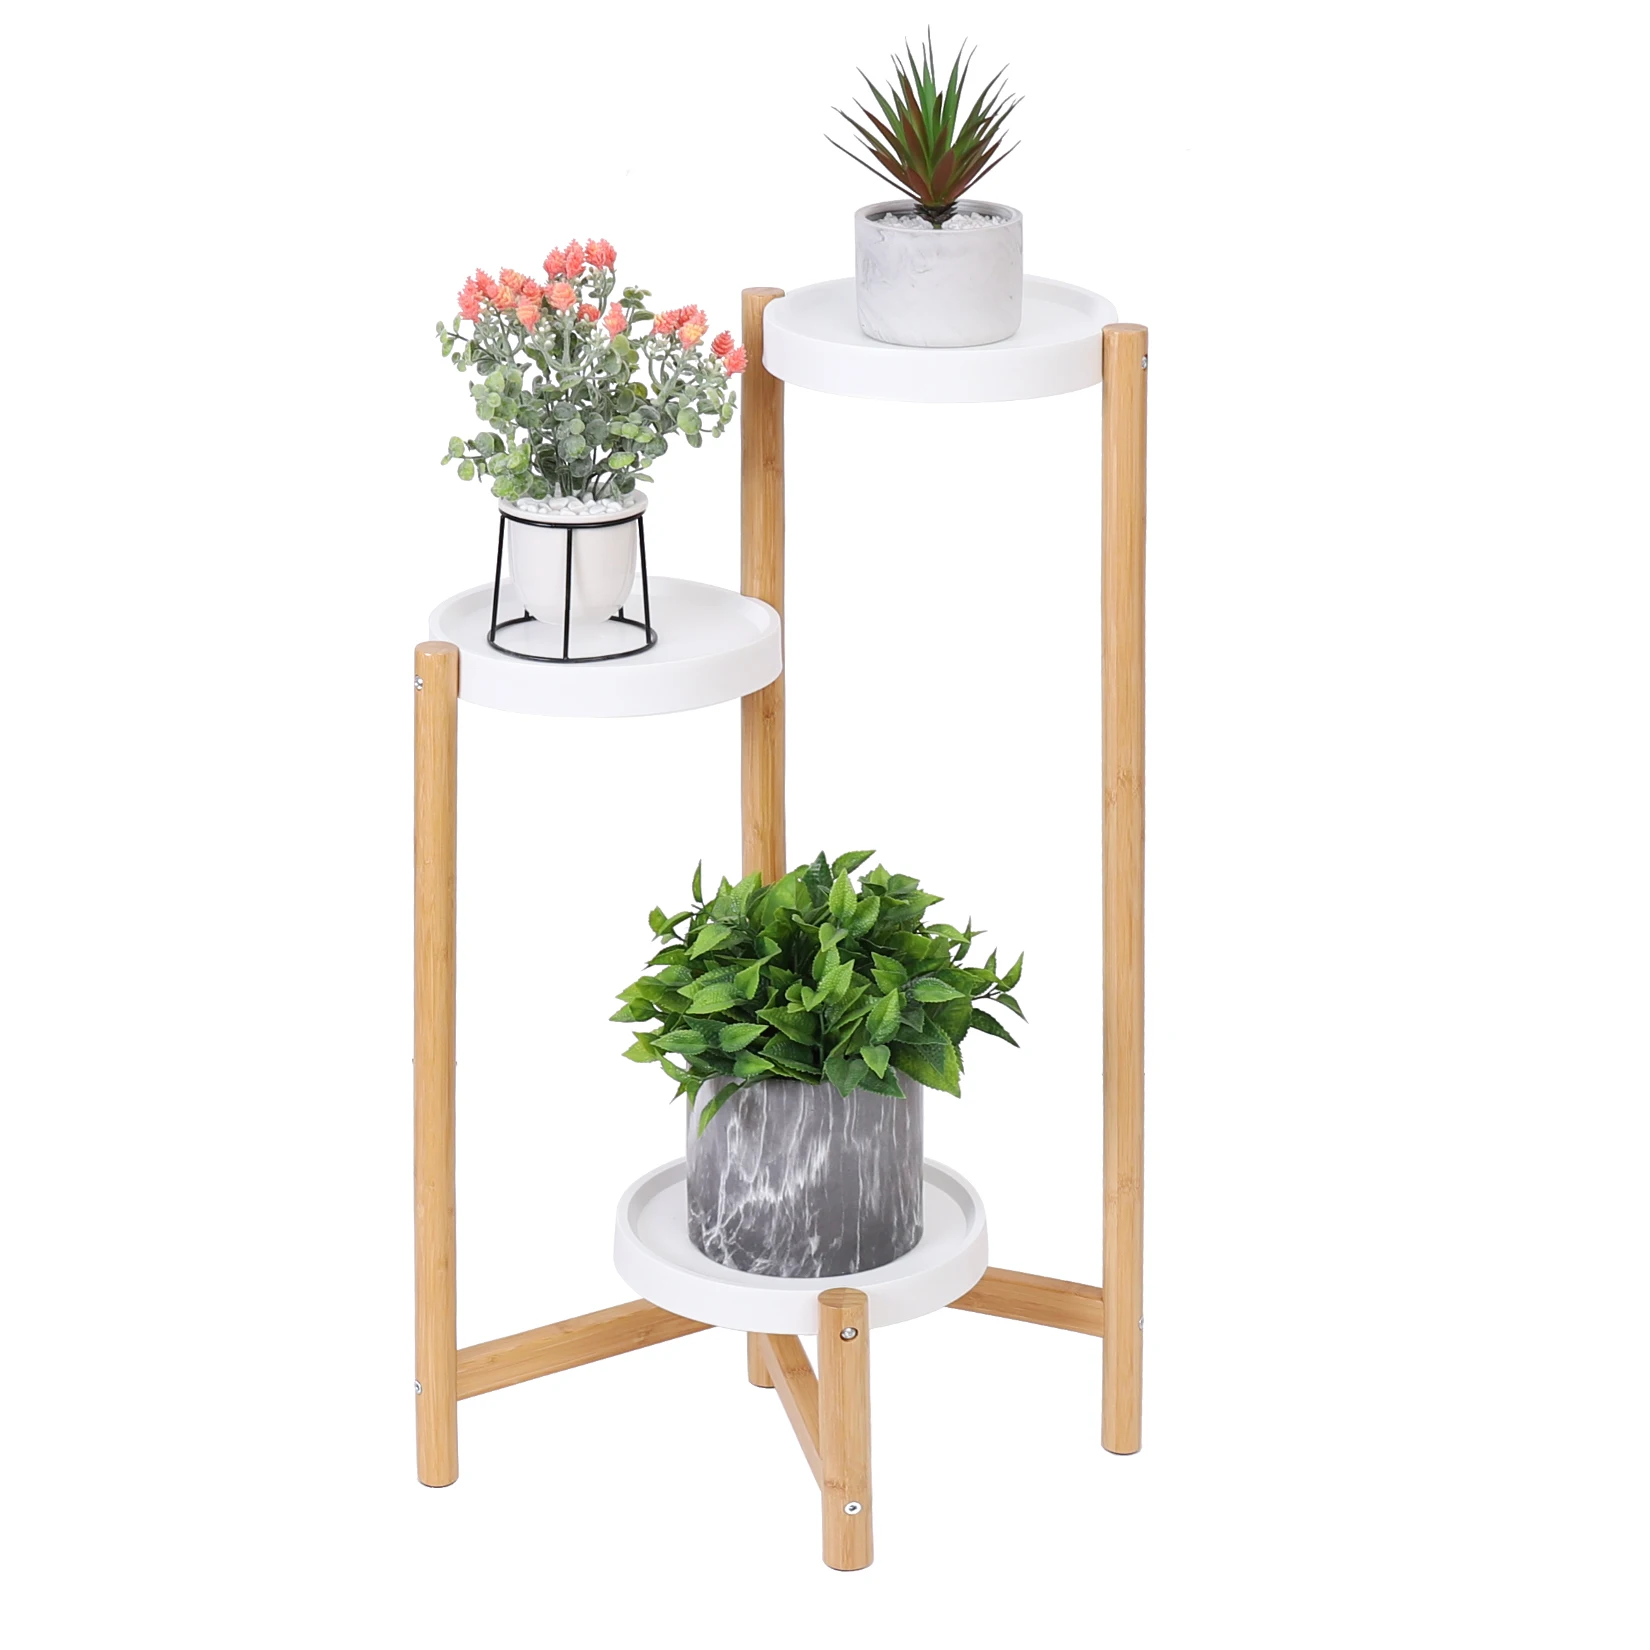 Bamboo Plant Stands Indoor, 3 Tier Tall Corner Plant Stand Holder & Plant Display Rack for Outdoor Garden 6